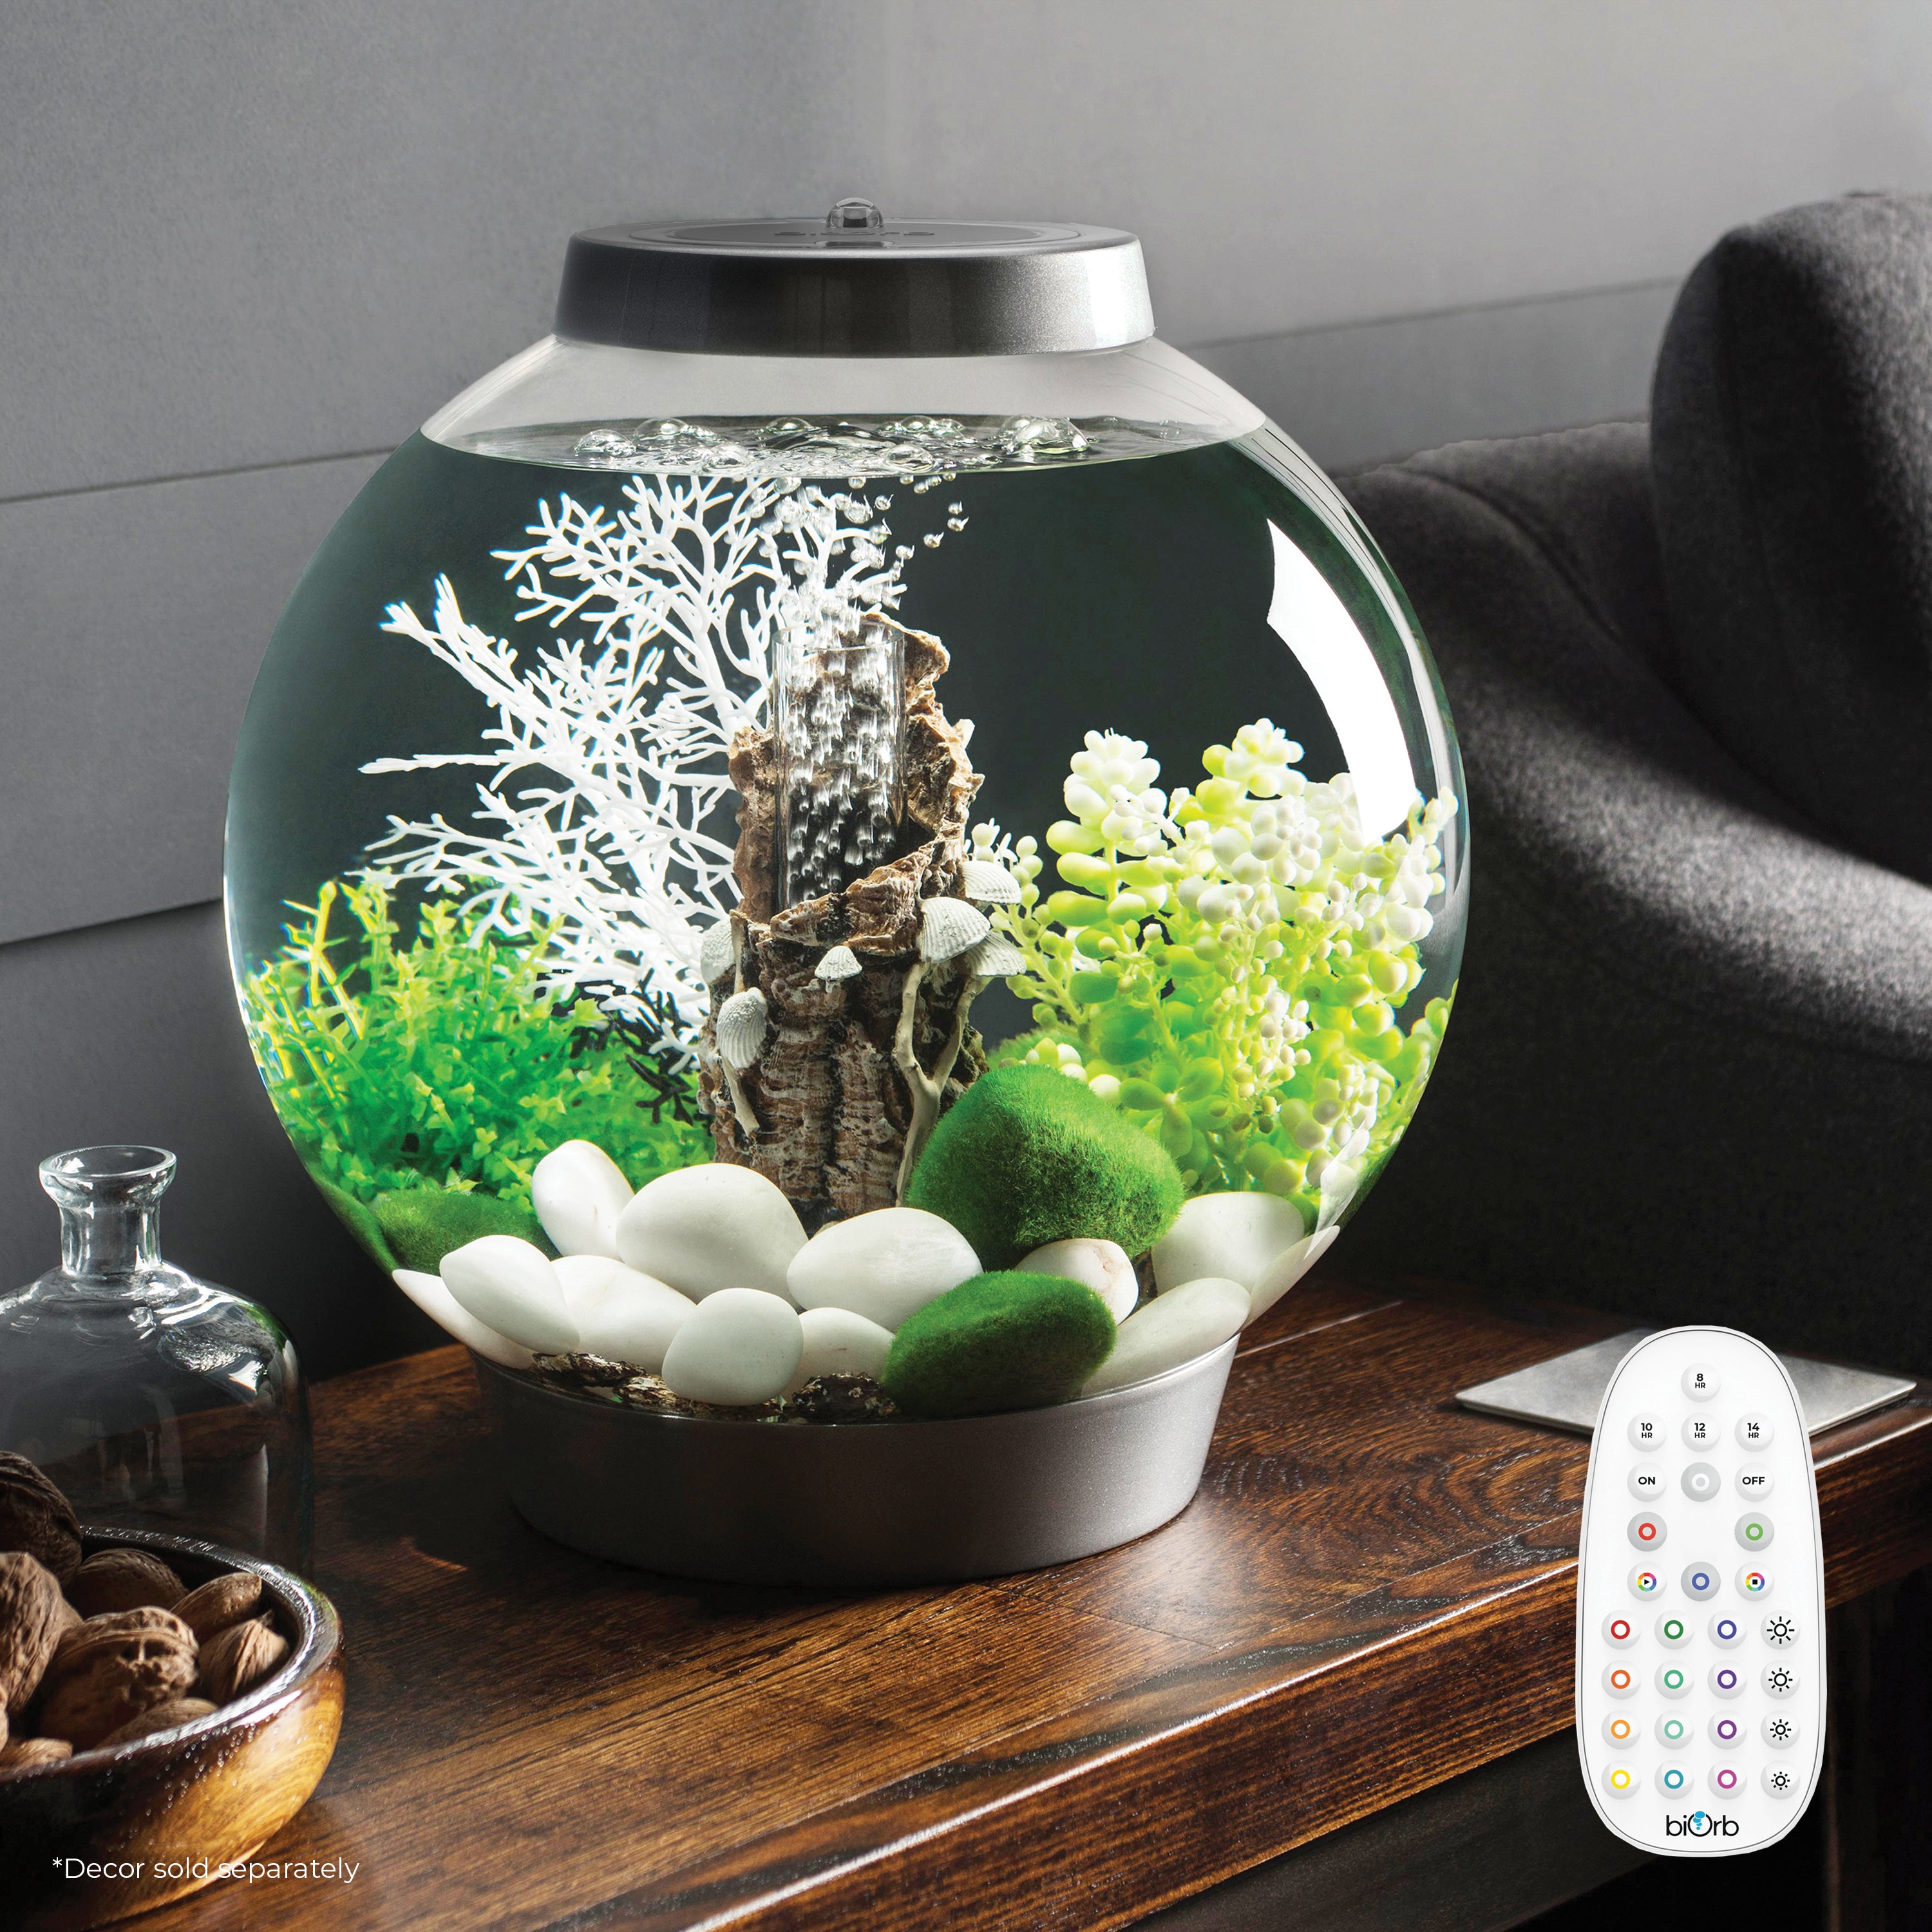 Get inspiration for your aquarium design by using CLASSIC 15 Aquarium with MCR Light - 4 gallon in silver that features remote